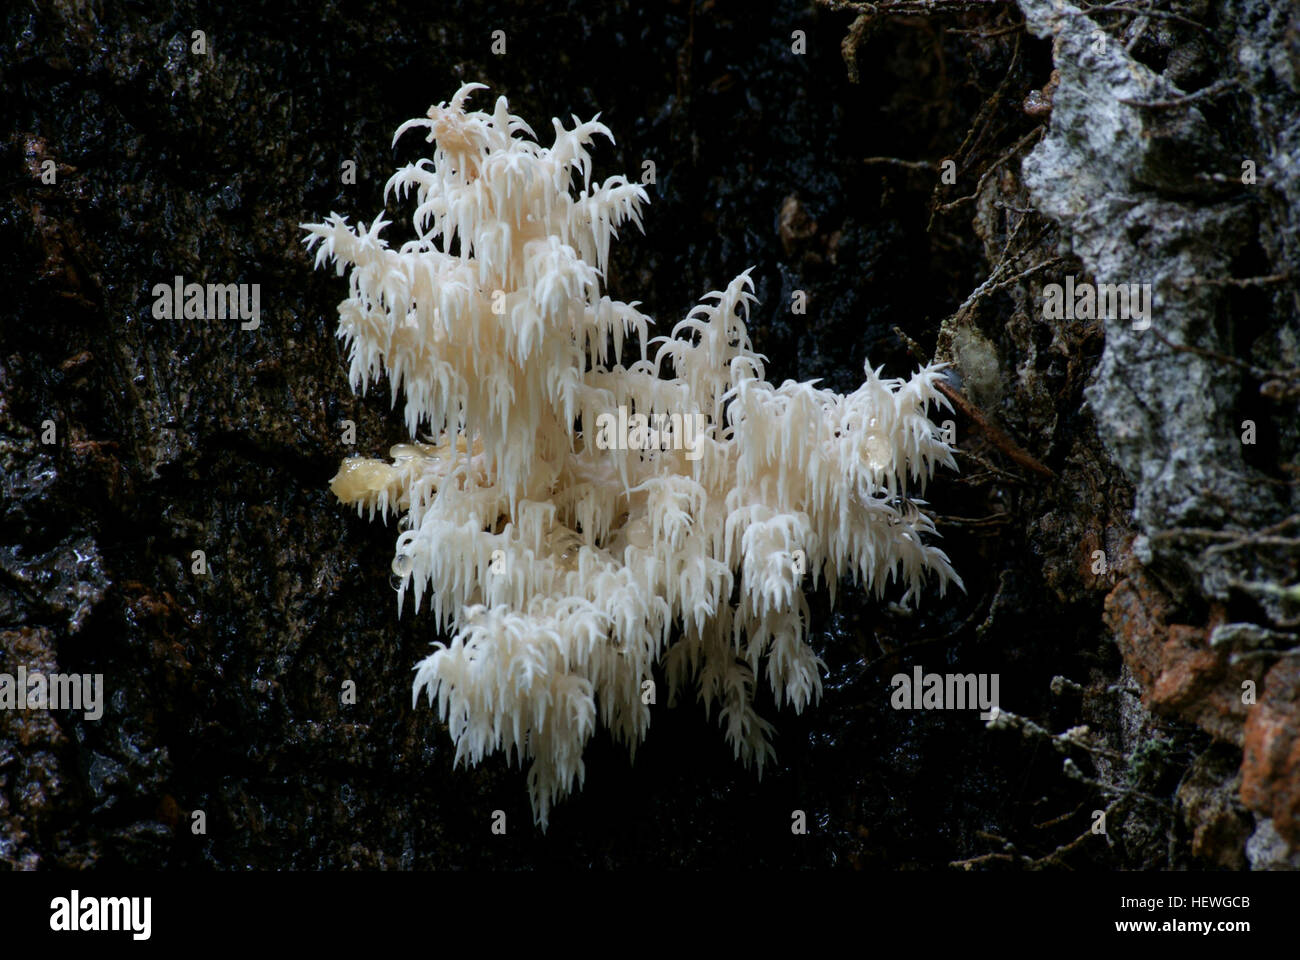 Description  The coral tooth fungus (Hericium coralloides) has been described as our most beautiful species of fungus. It is a member of the group called 'tooth fungi', because their fruit bodies produce tooth-like spines  These spines serve the same function (producing spores) as the more familiar gills found on mushrooms The coral tooth fungus is pale whitish in colour, and has branches from which long, fine spines hang down like icicles. When young, the species has a more 'knobbly' appearance and is said to resemble a coral. Stock Photo